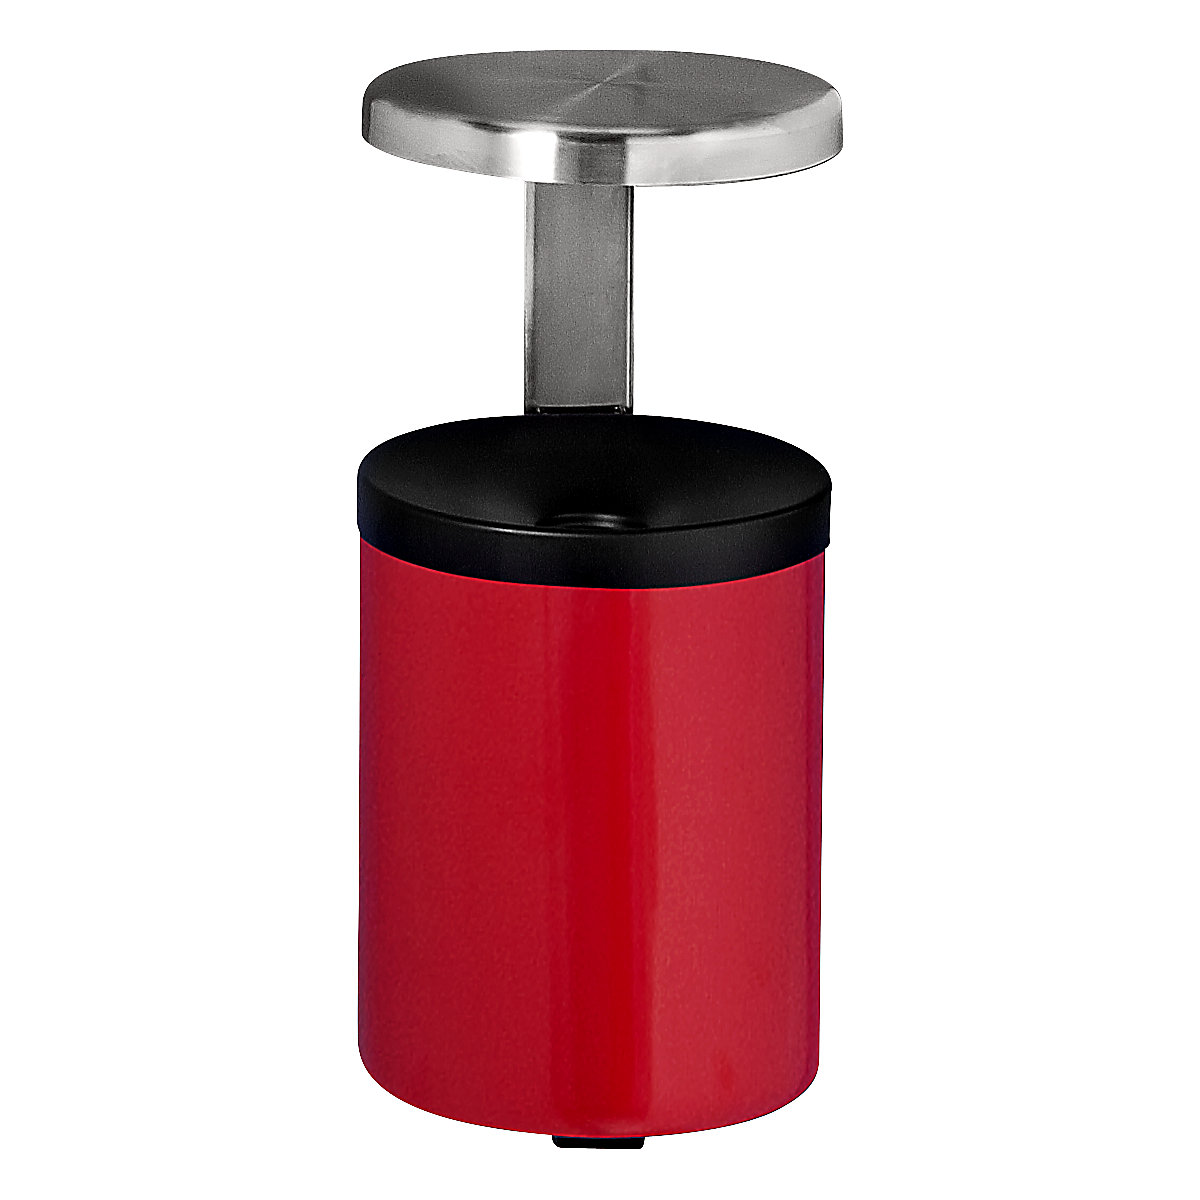 Safety wall ashtray with hood, round